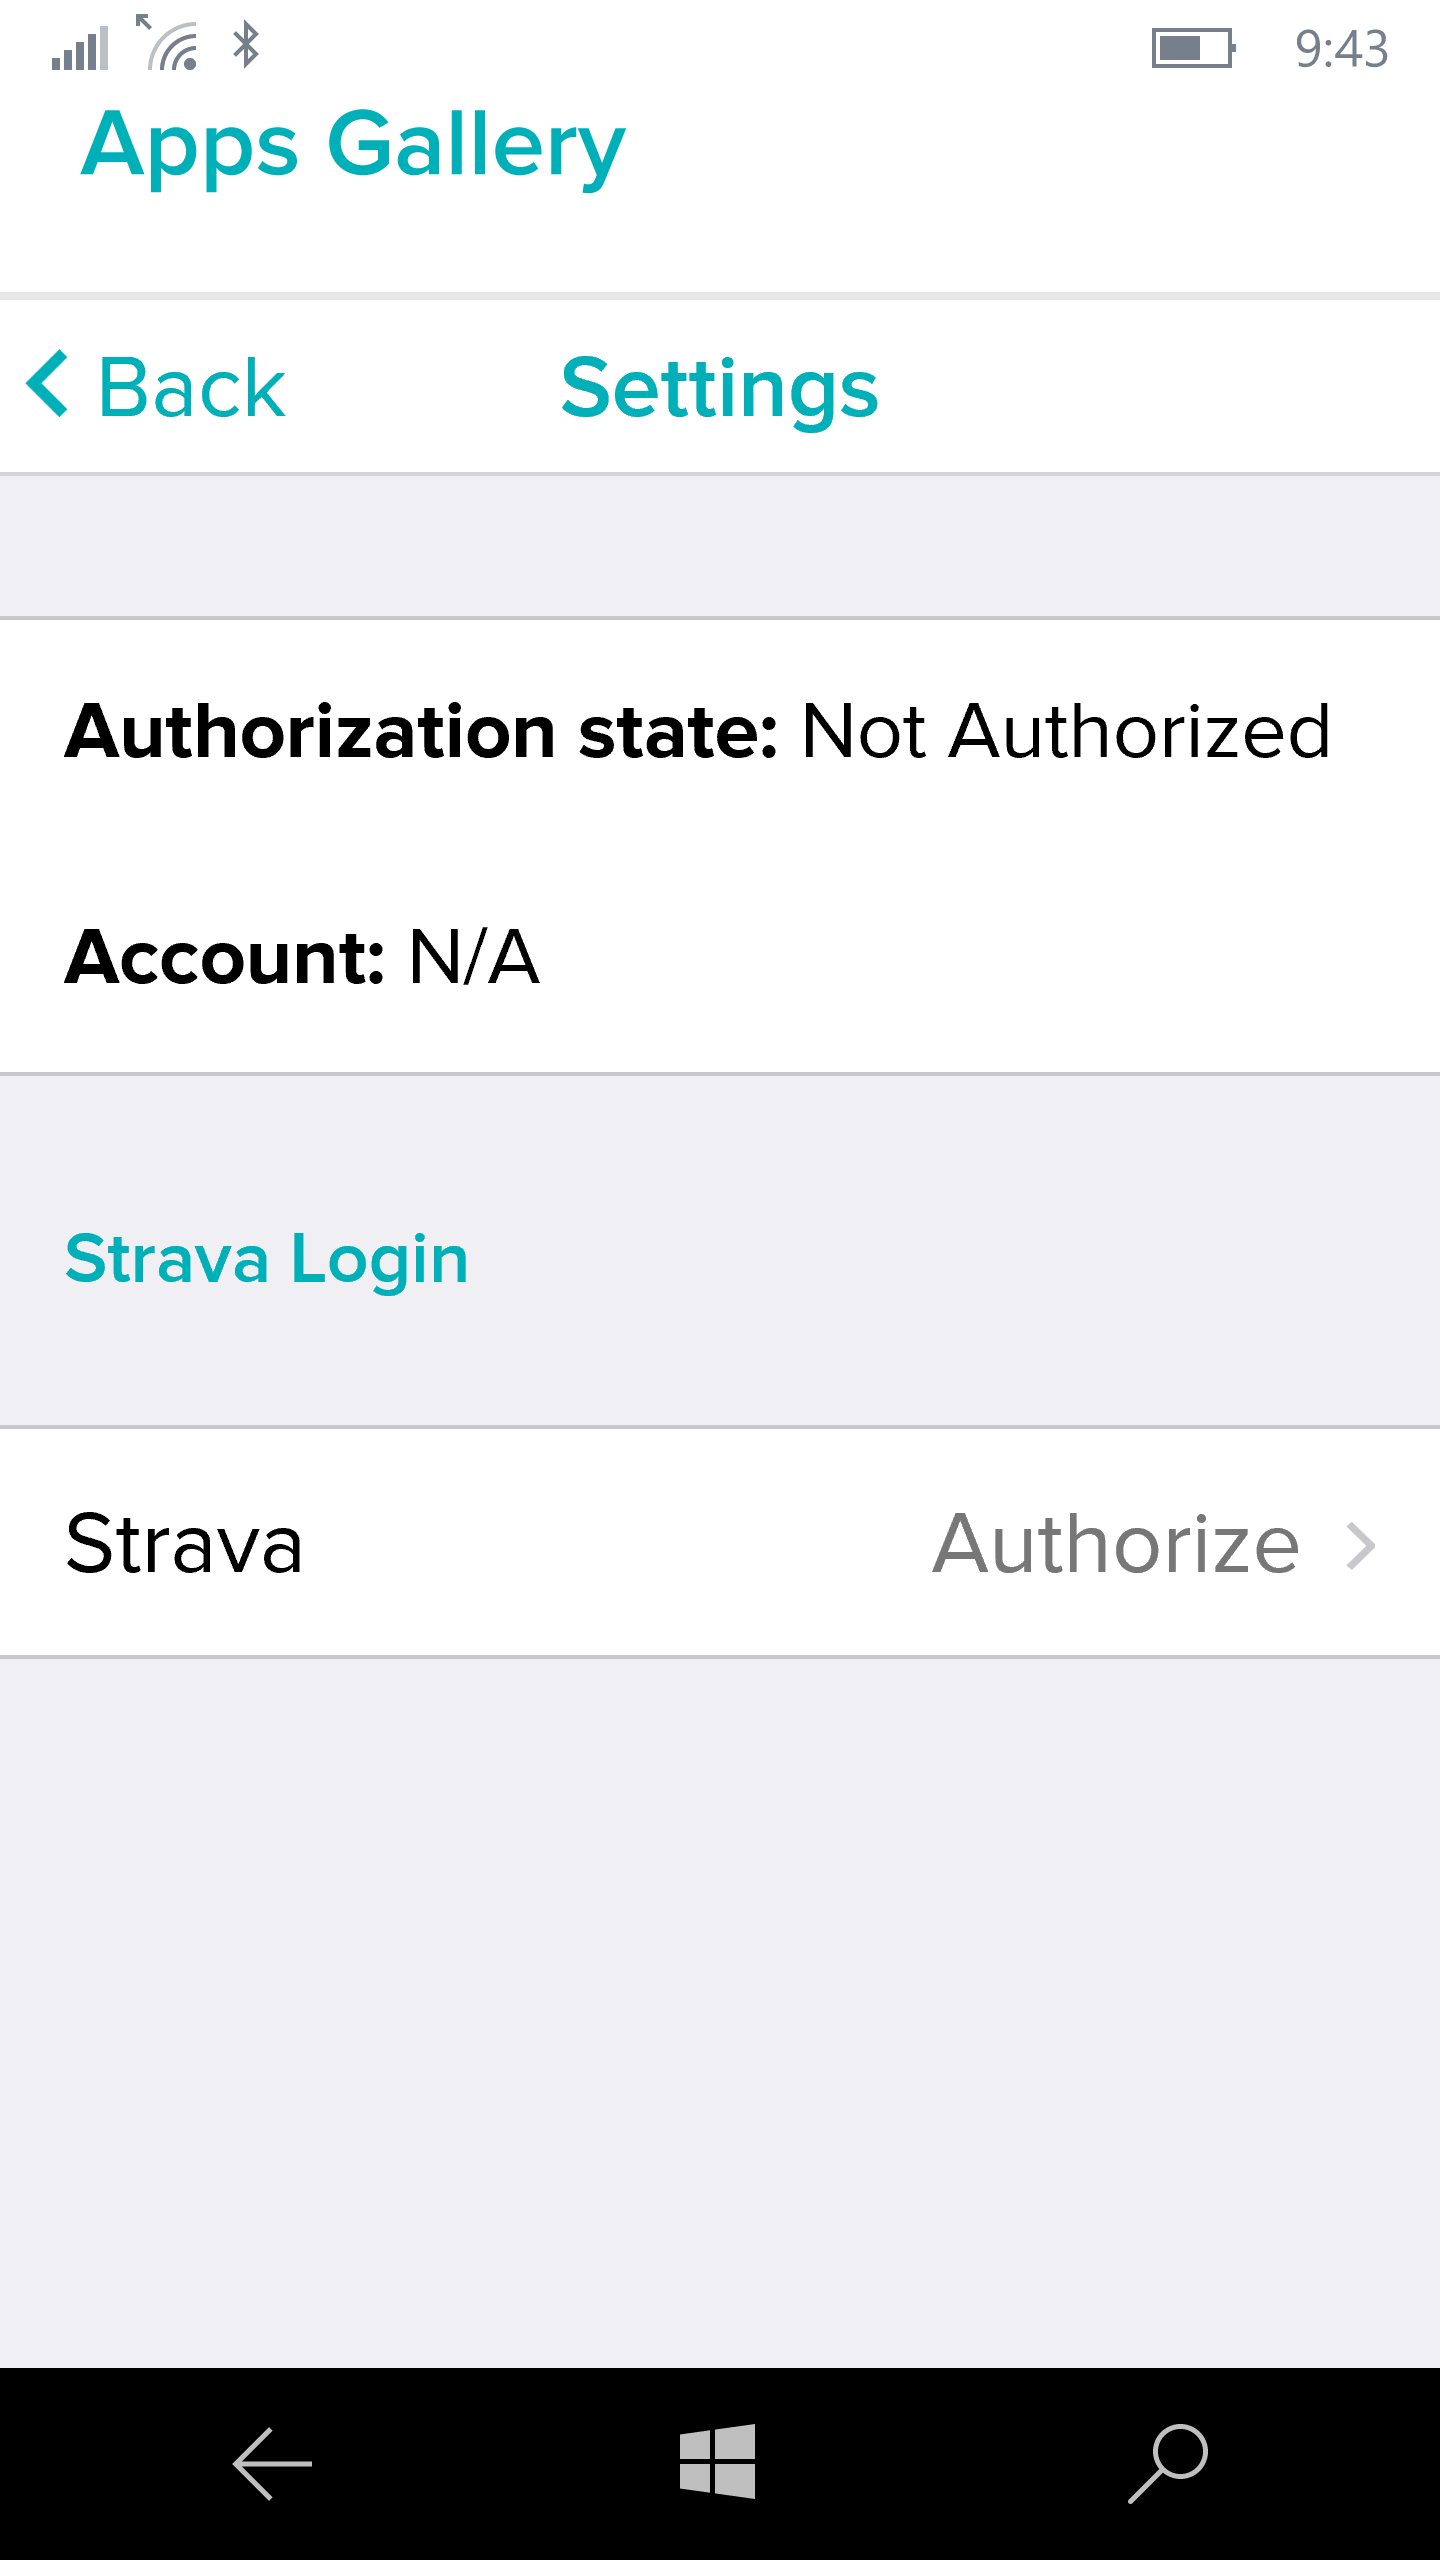 Solved: Strava Authorization state: Not 